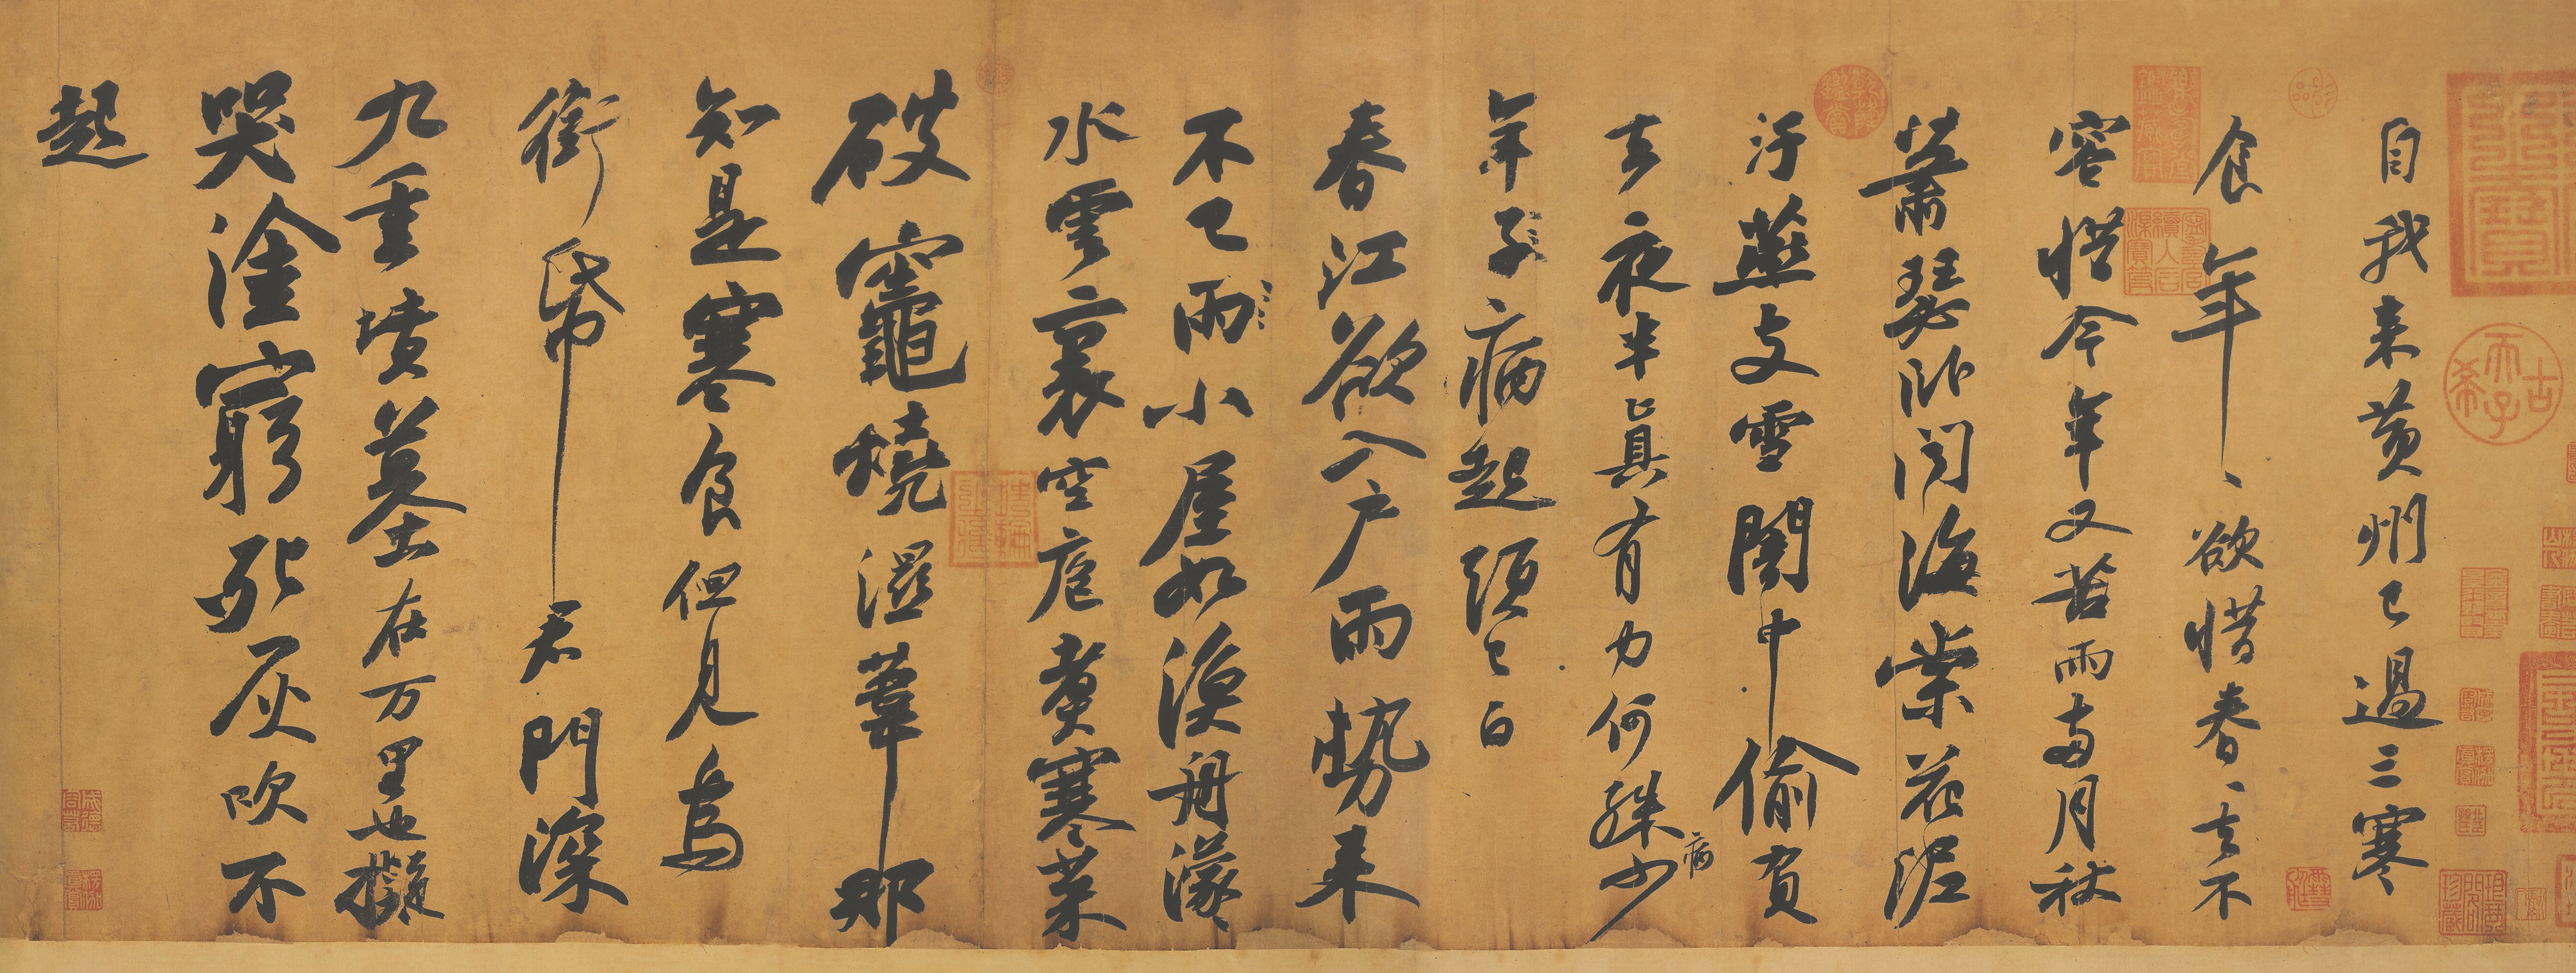 Calligraphy Chinese Characters Text Chinese 10472x3957